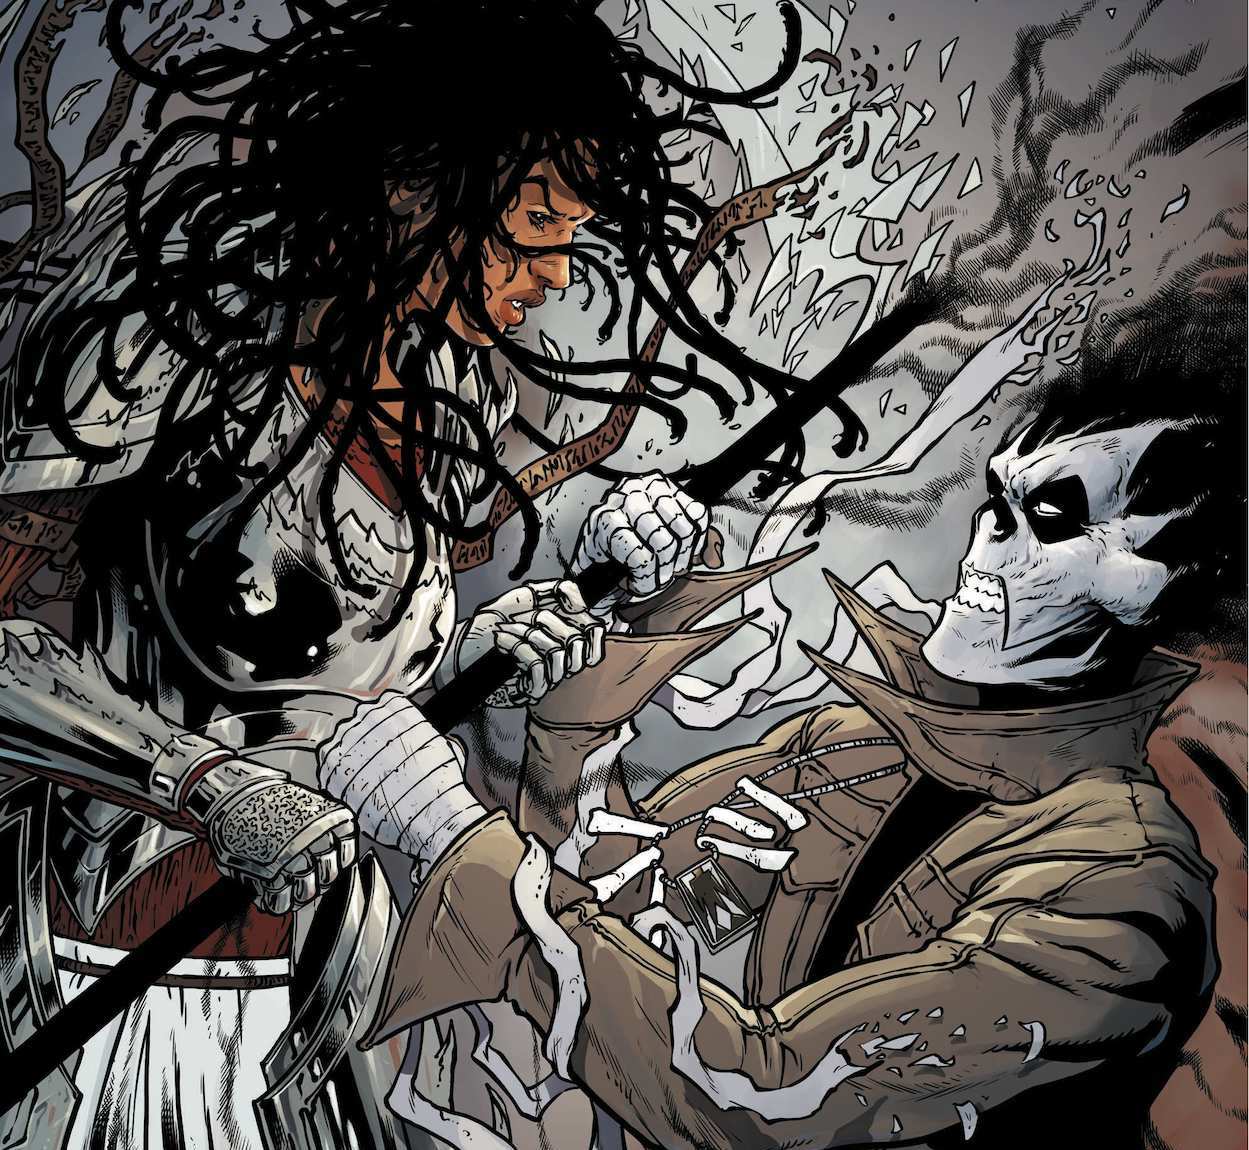 'Shadowman' #8 features epic moments and shakes things up